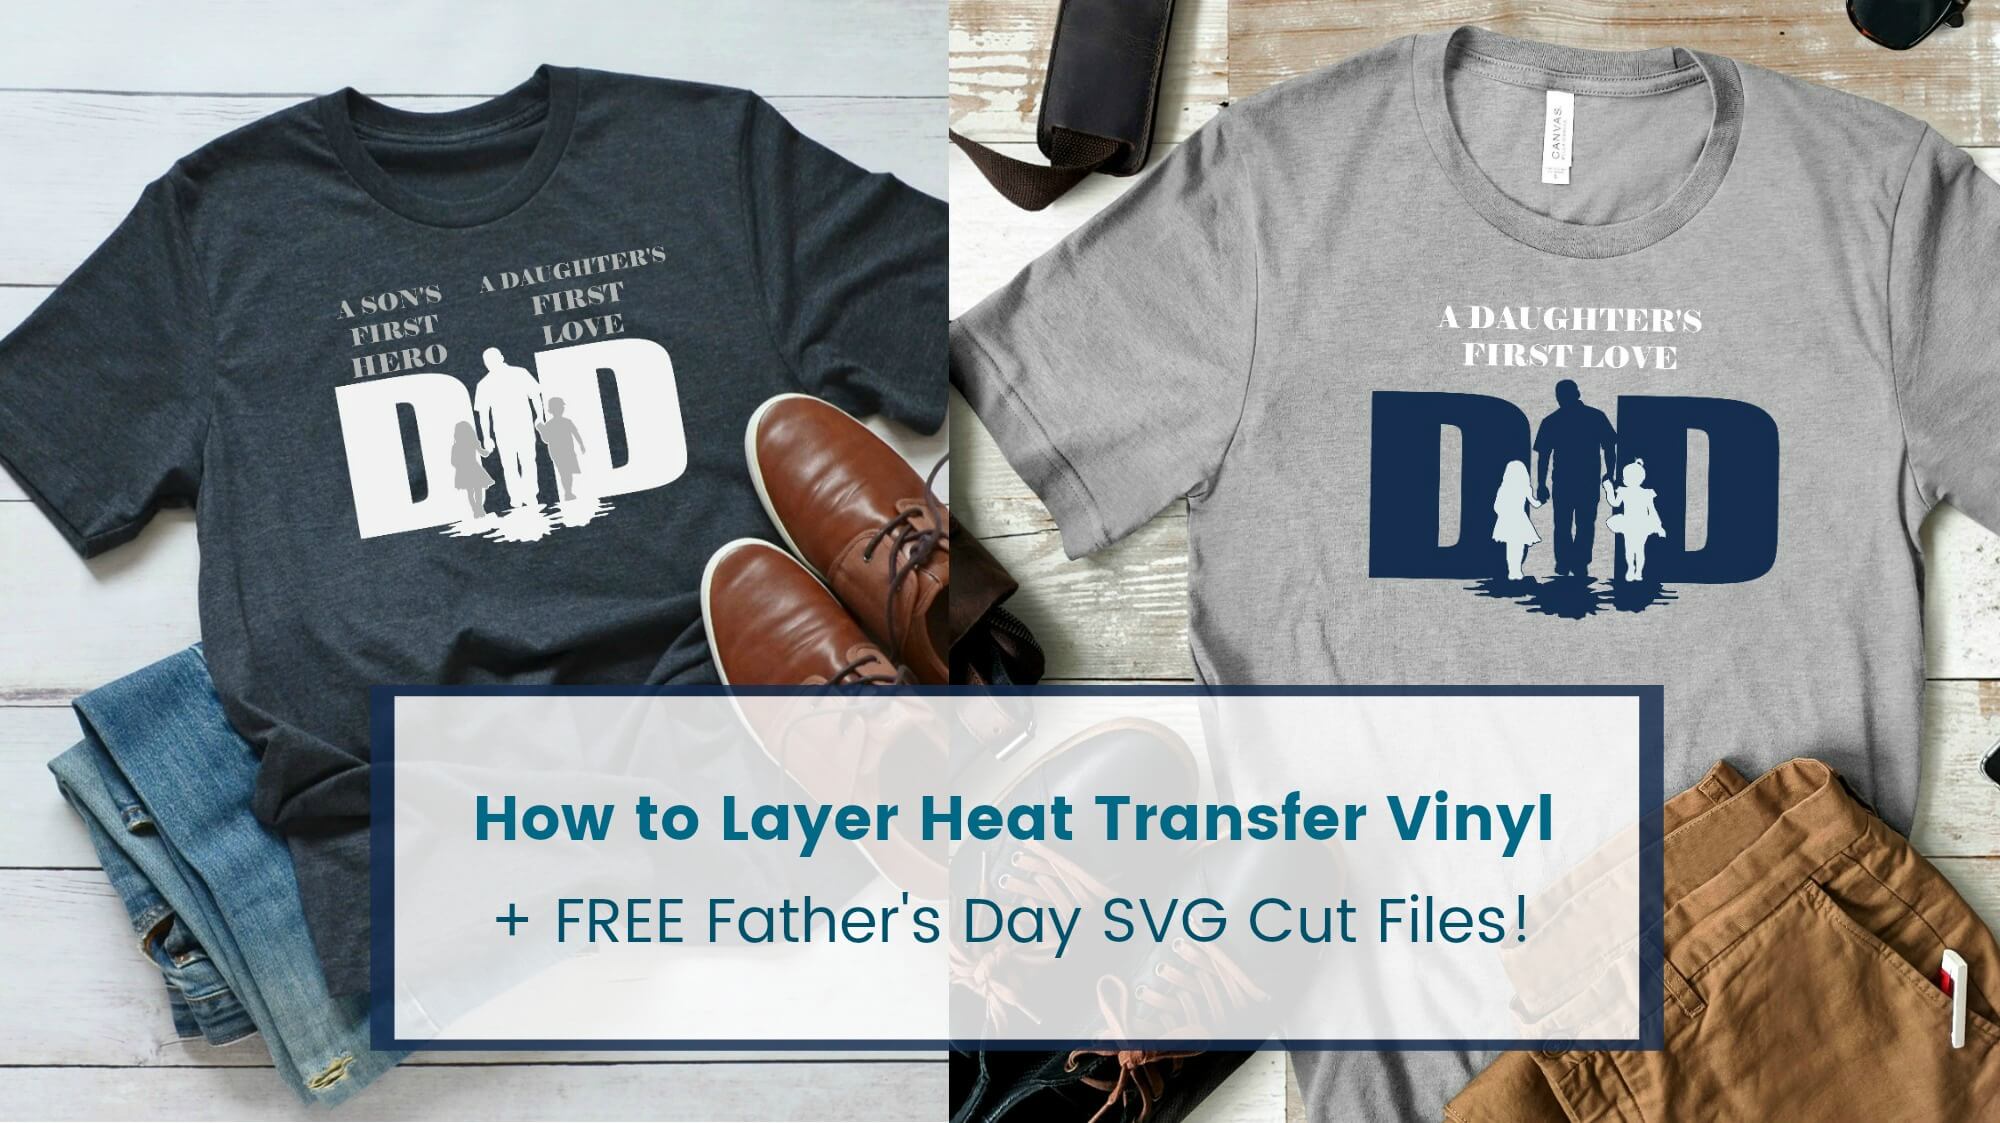 Free Father’s Day SVG – DIY Shirts For Dad With Iron-On Vinyl